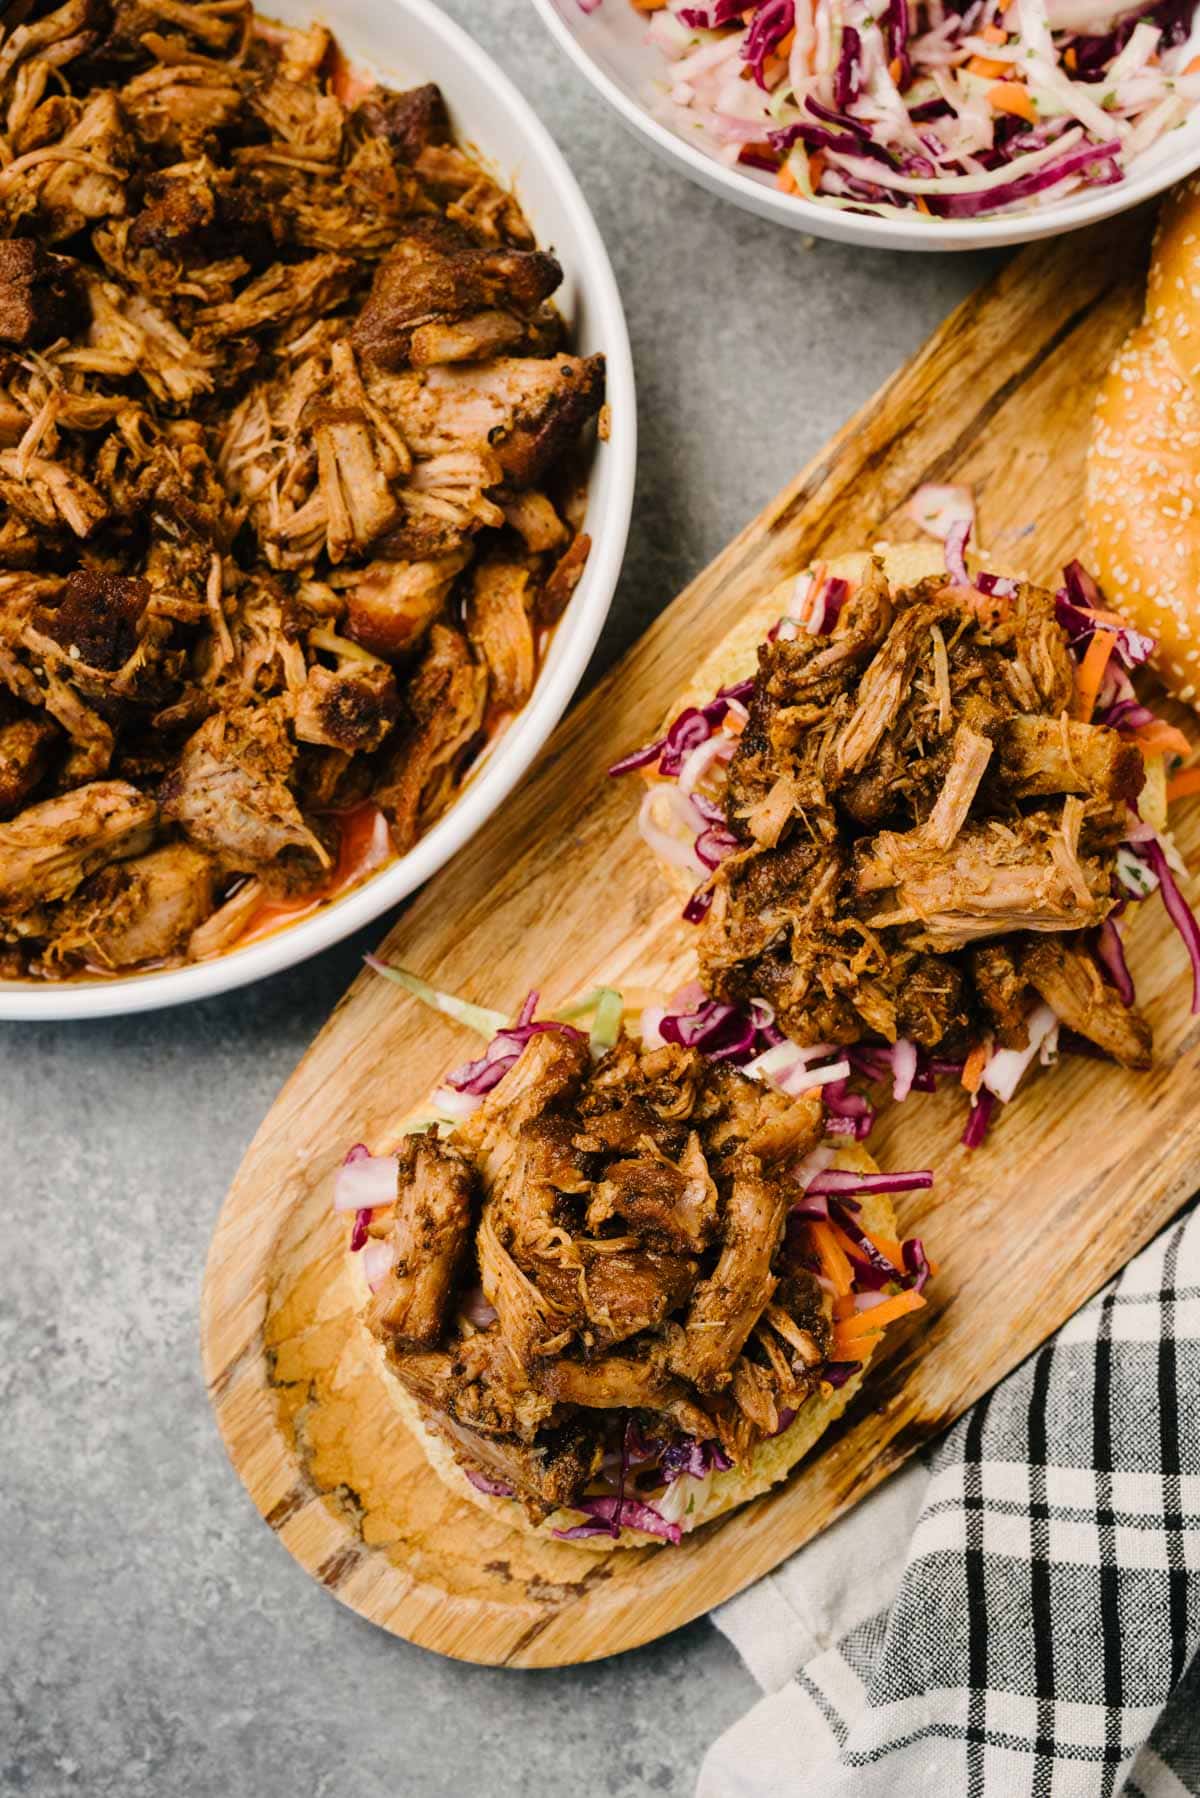 Two buns topped with coleslaw and pulled pork on a wood serving board. The board is surrounded by a bowl of pulled pork, a bowl of coleslaw, and a linen napkin.